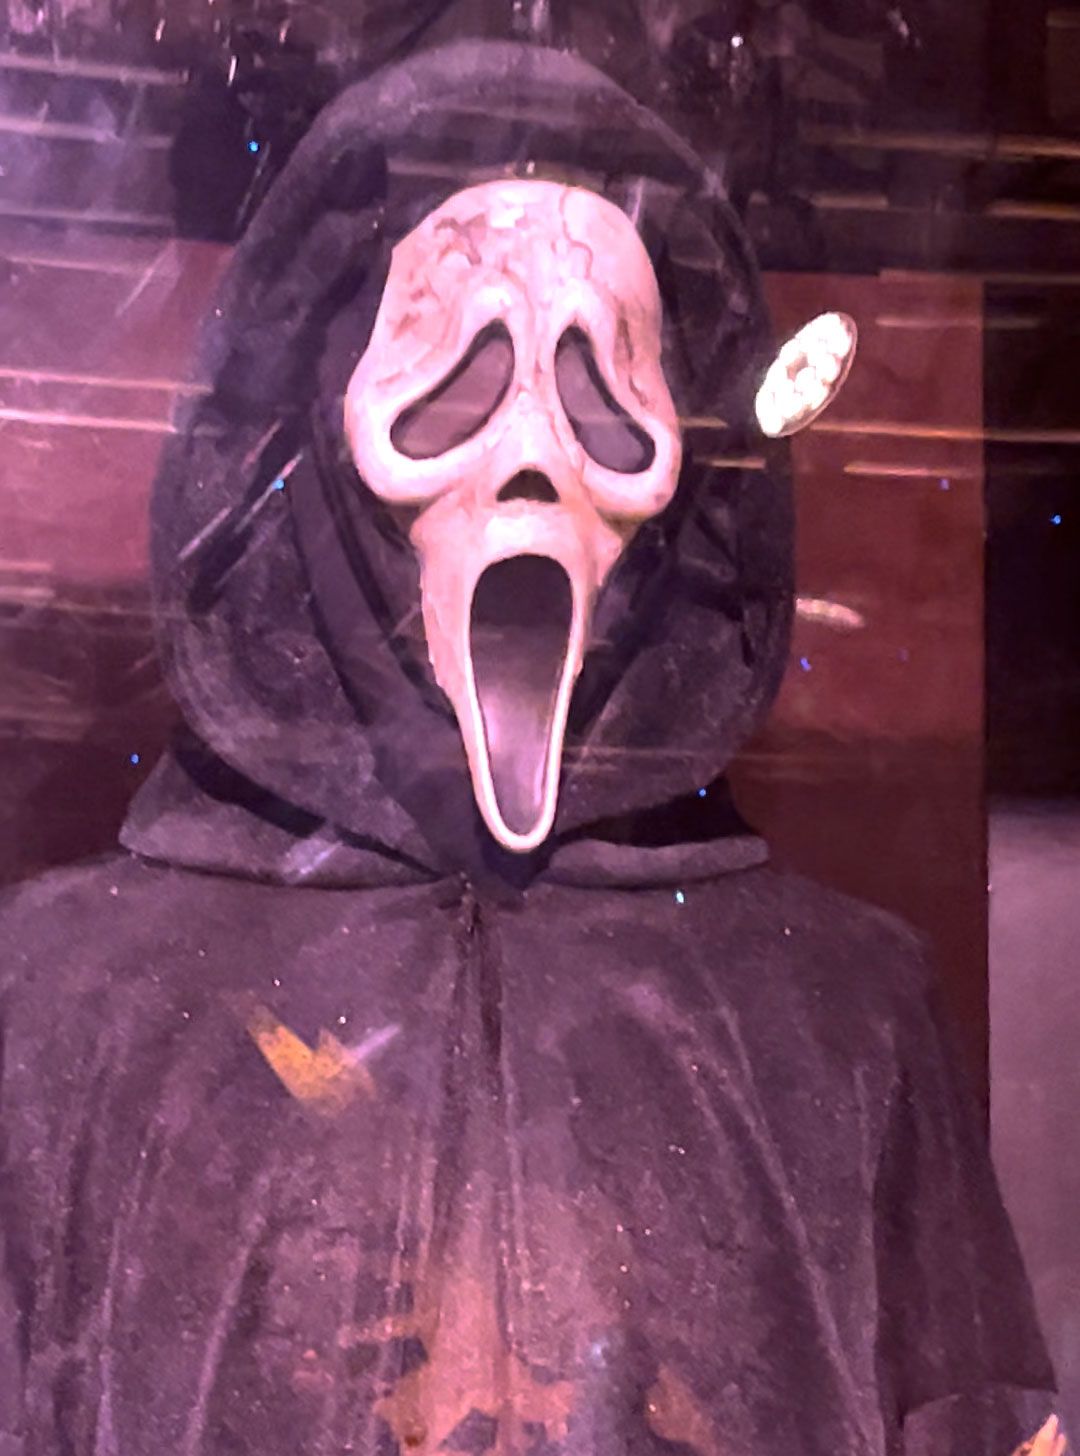 Billy Loomis' costume from the Scream VI experience